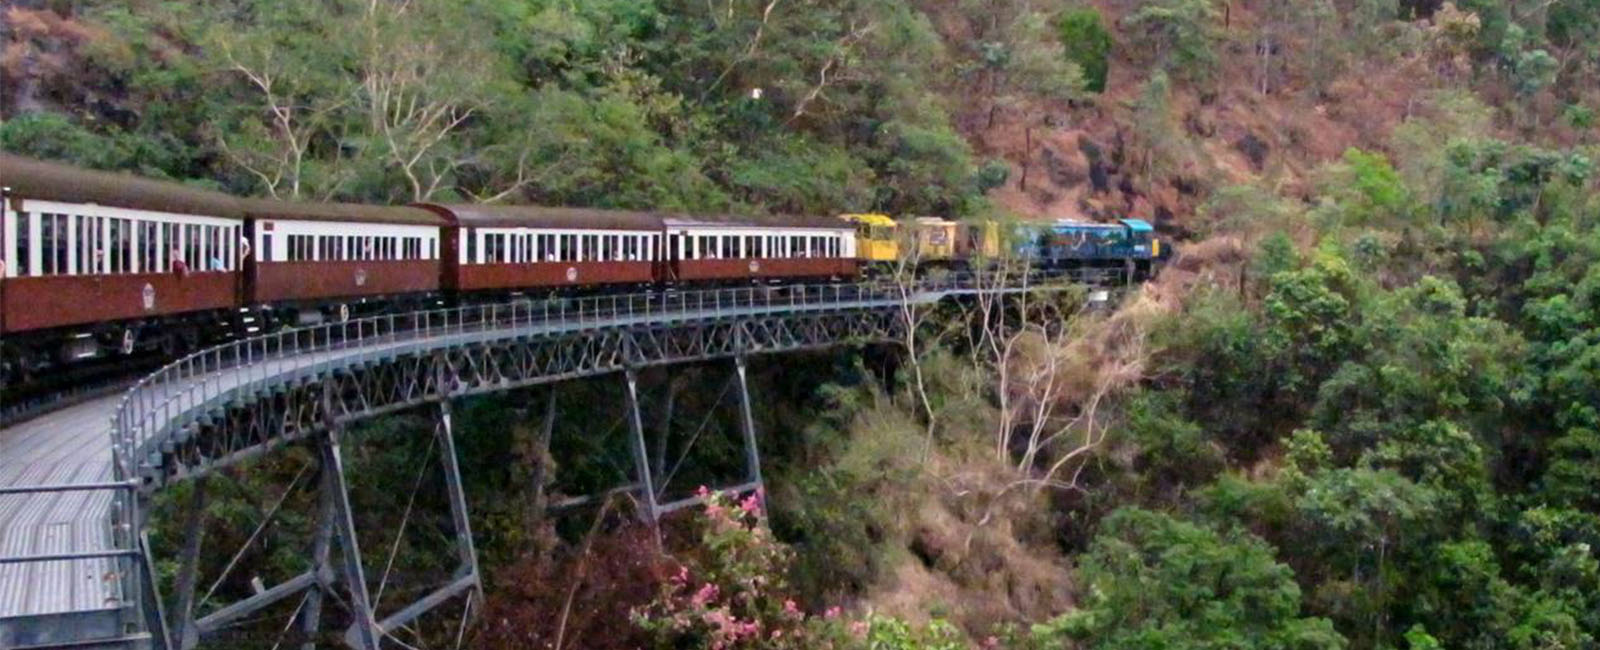 A train curves around a mountain in the rainforest